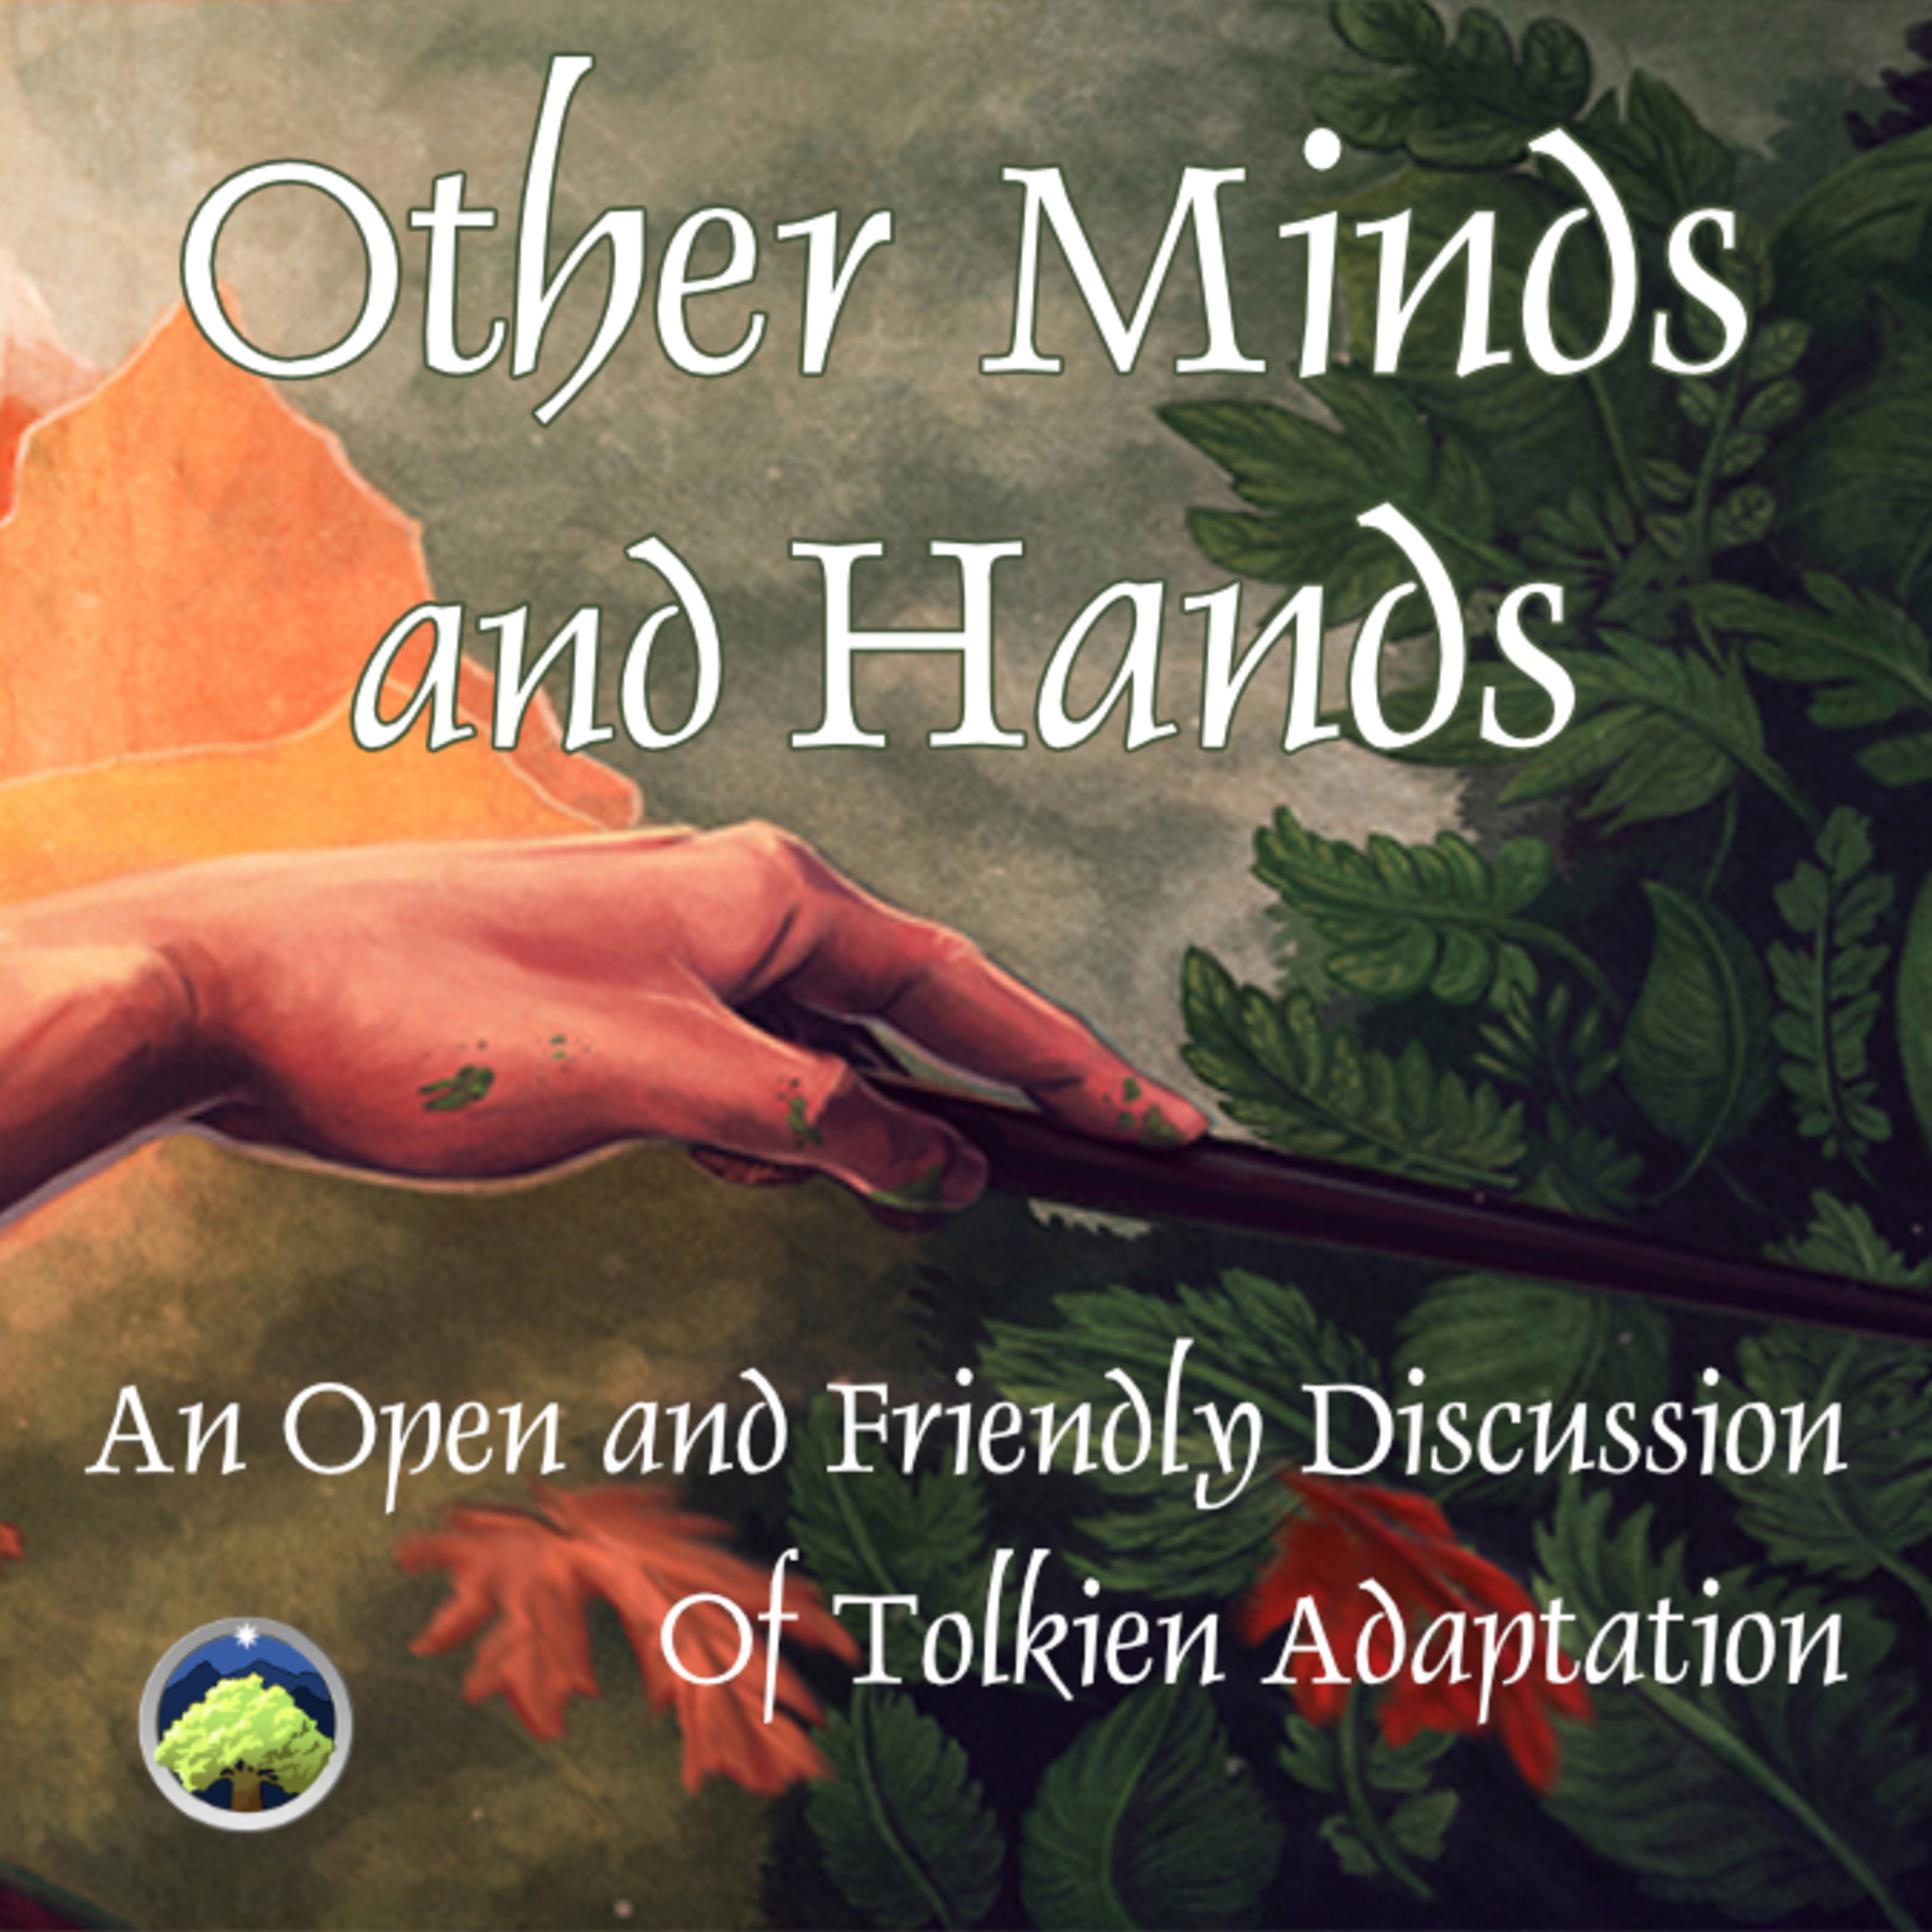 473: Other Minds and Hands, Episode 8